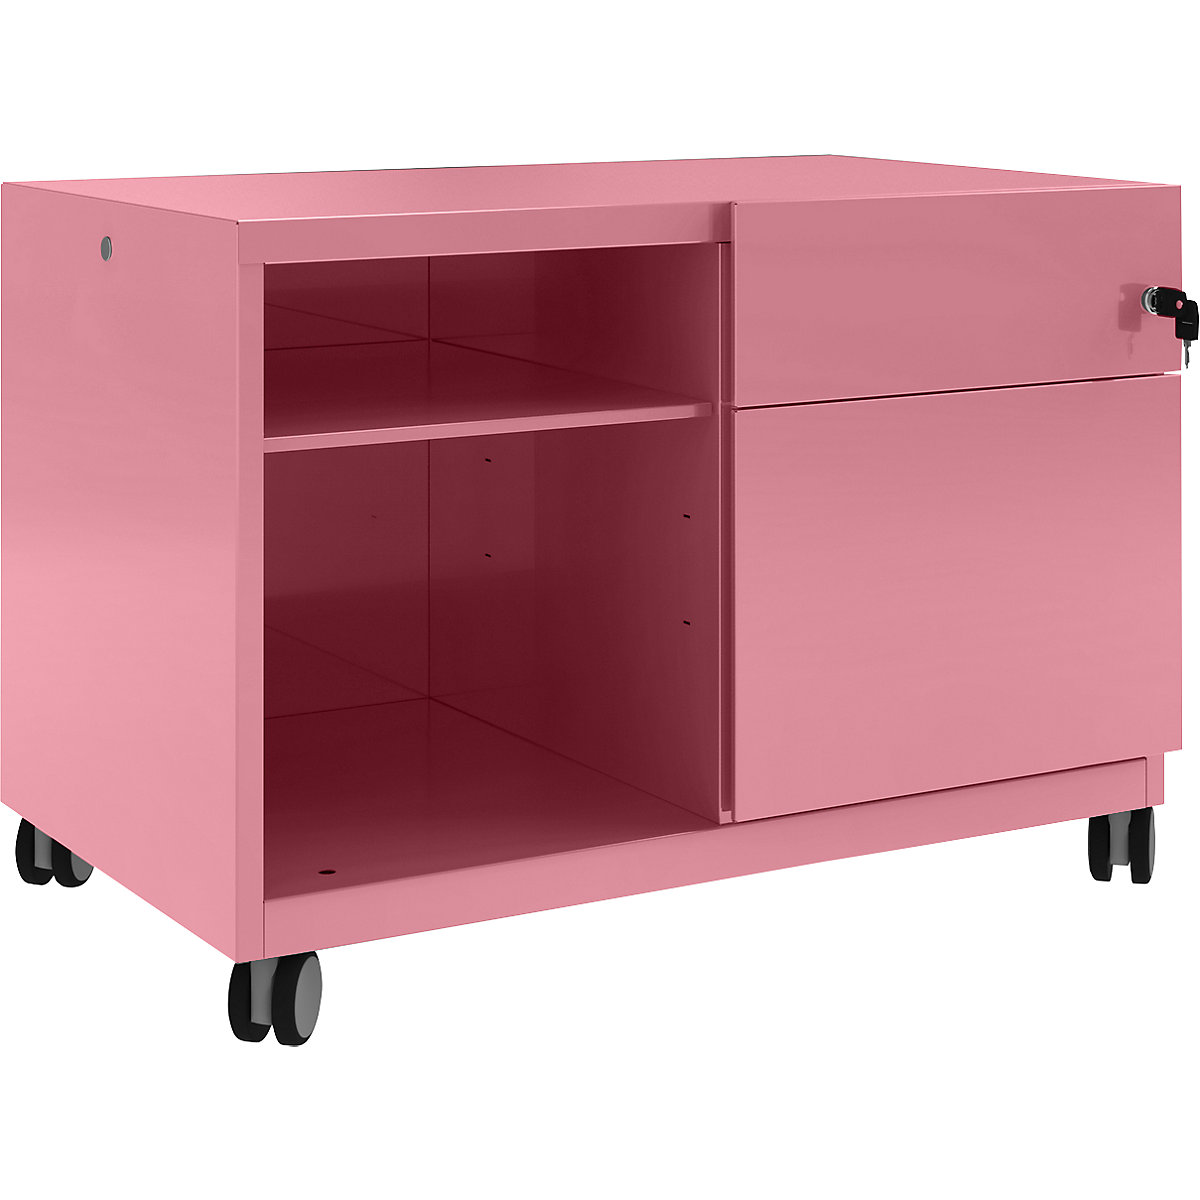 Note™ CADDY, HxBxT 563 x 800 x 490 mm – BISLEY, 1 universal drawer and suspension file drawer on the right, pink-28